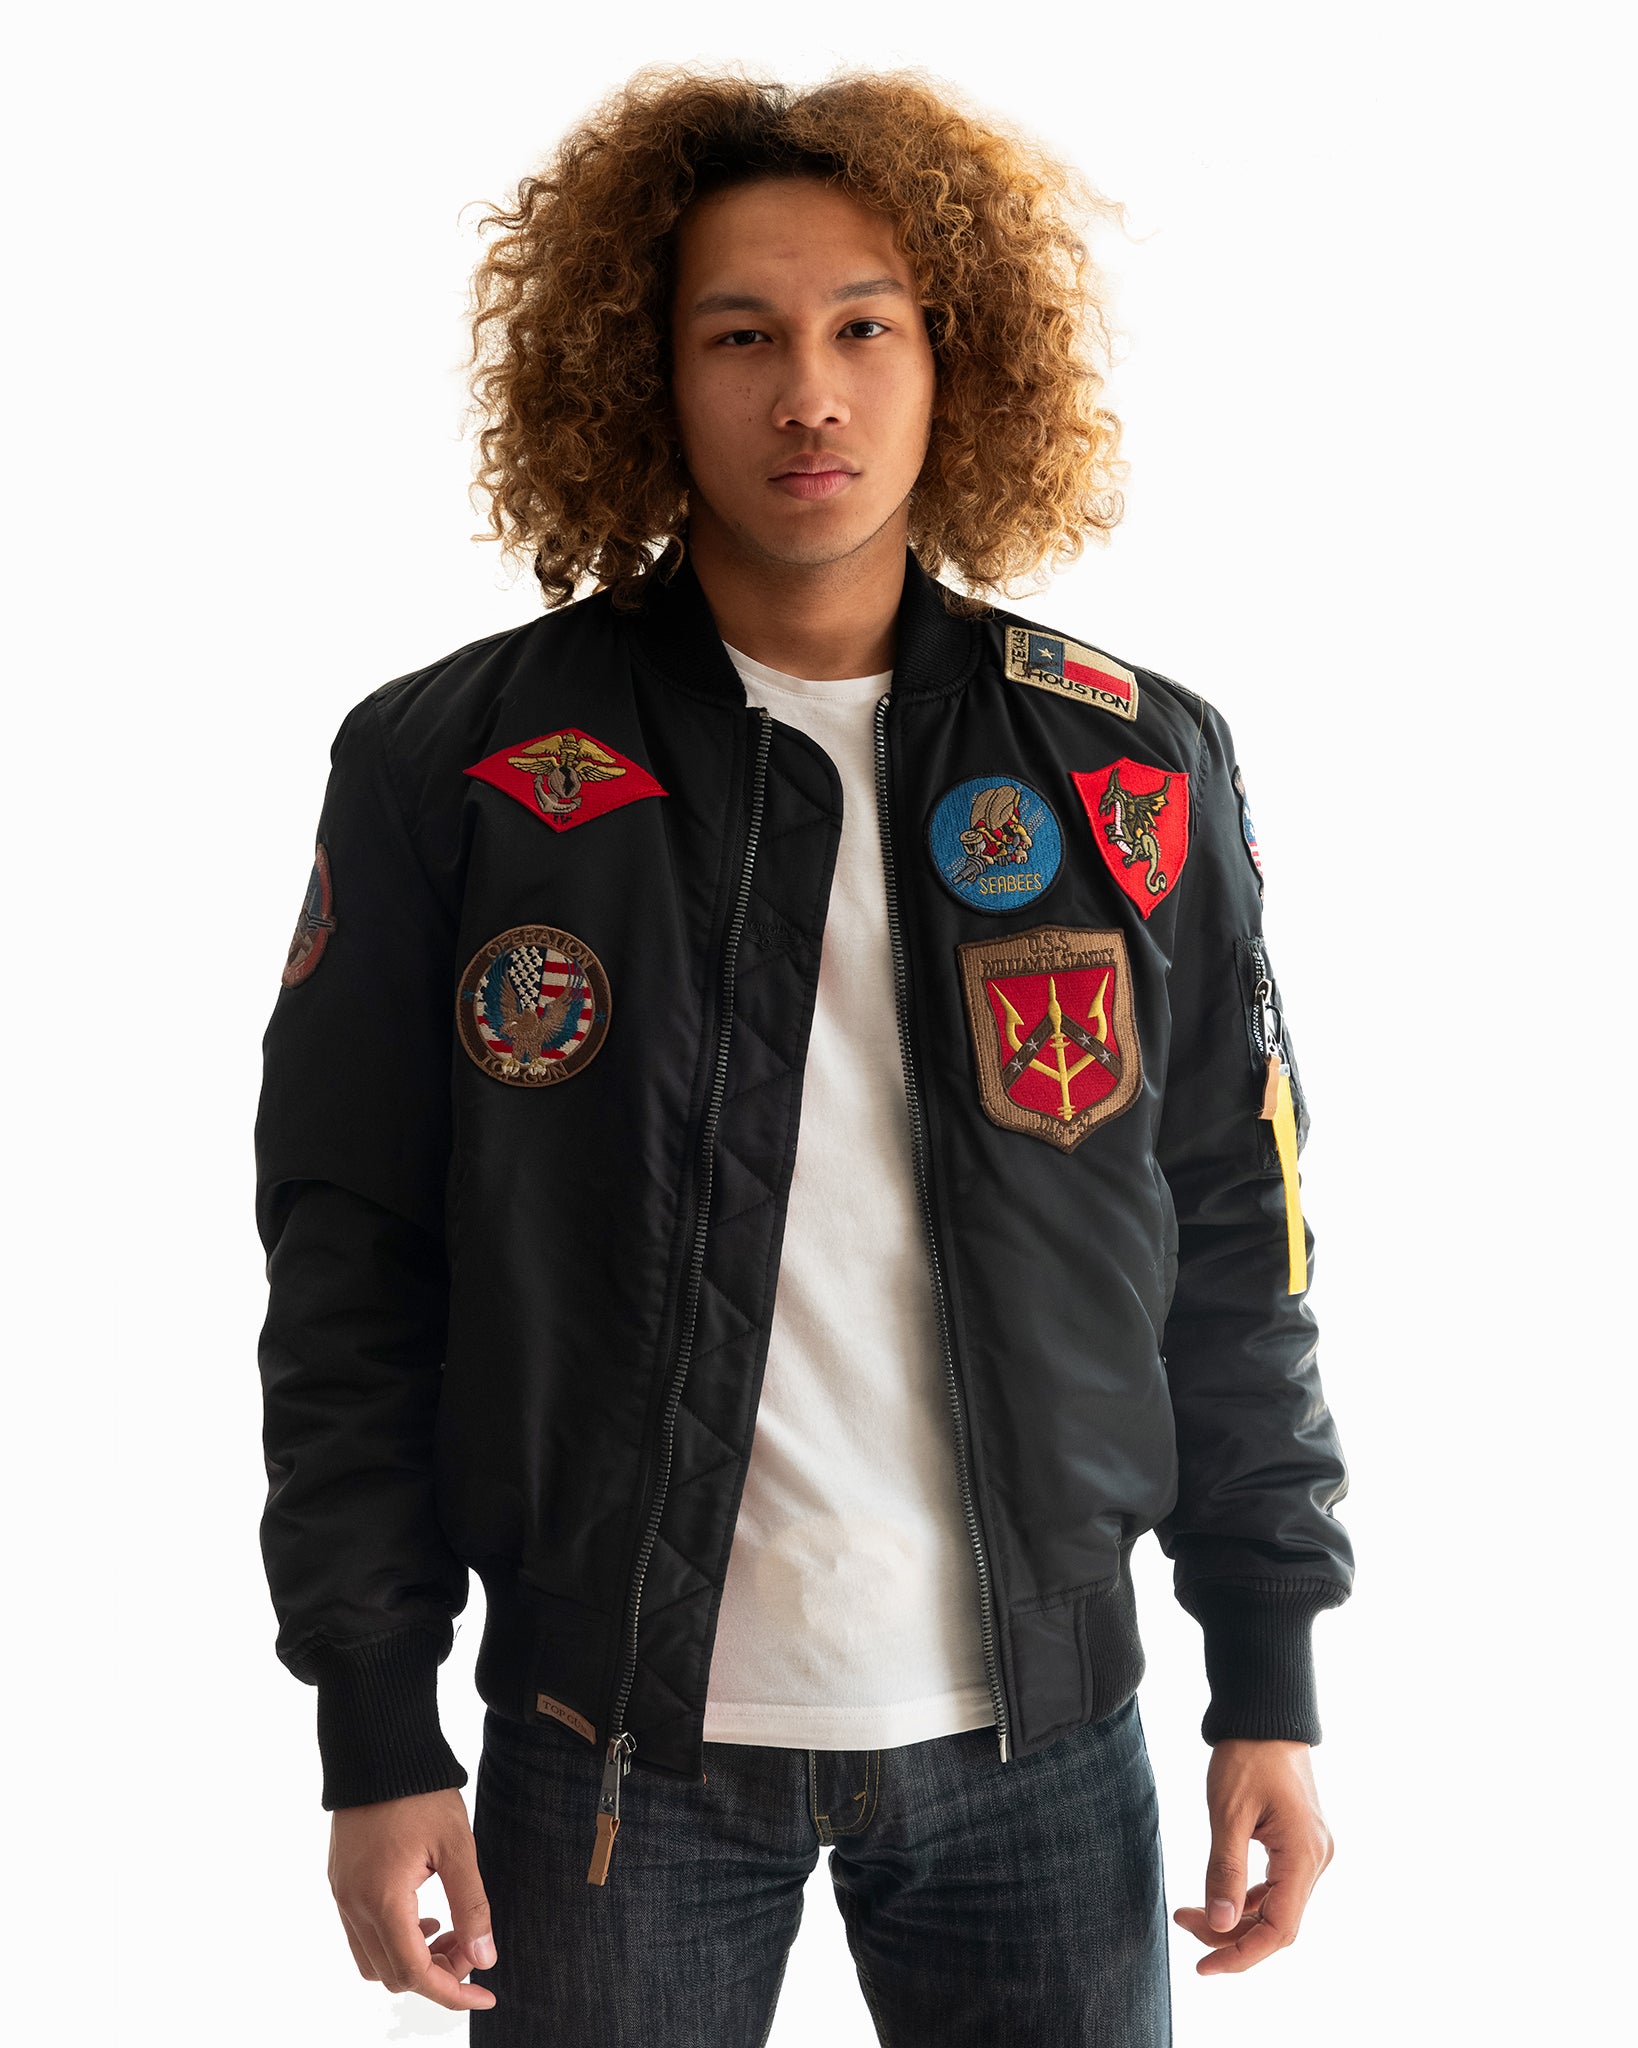 TOP GUN® MA-1 NYLON BOMBER JACKET WITH PATCHES – Top Gun Store